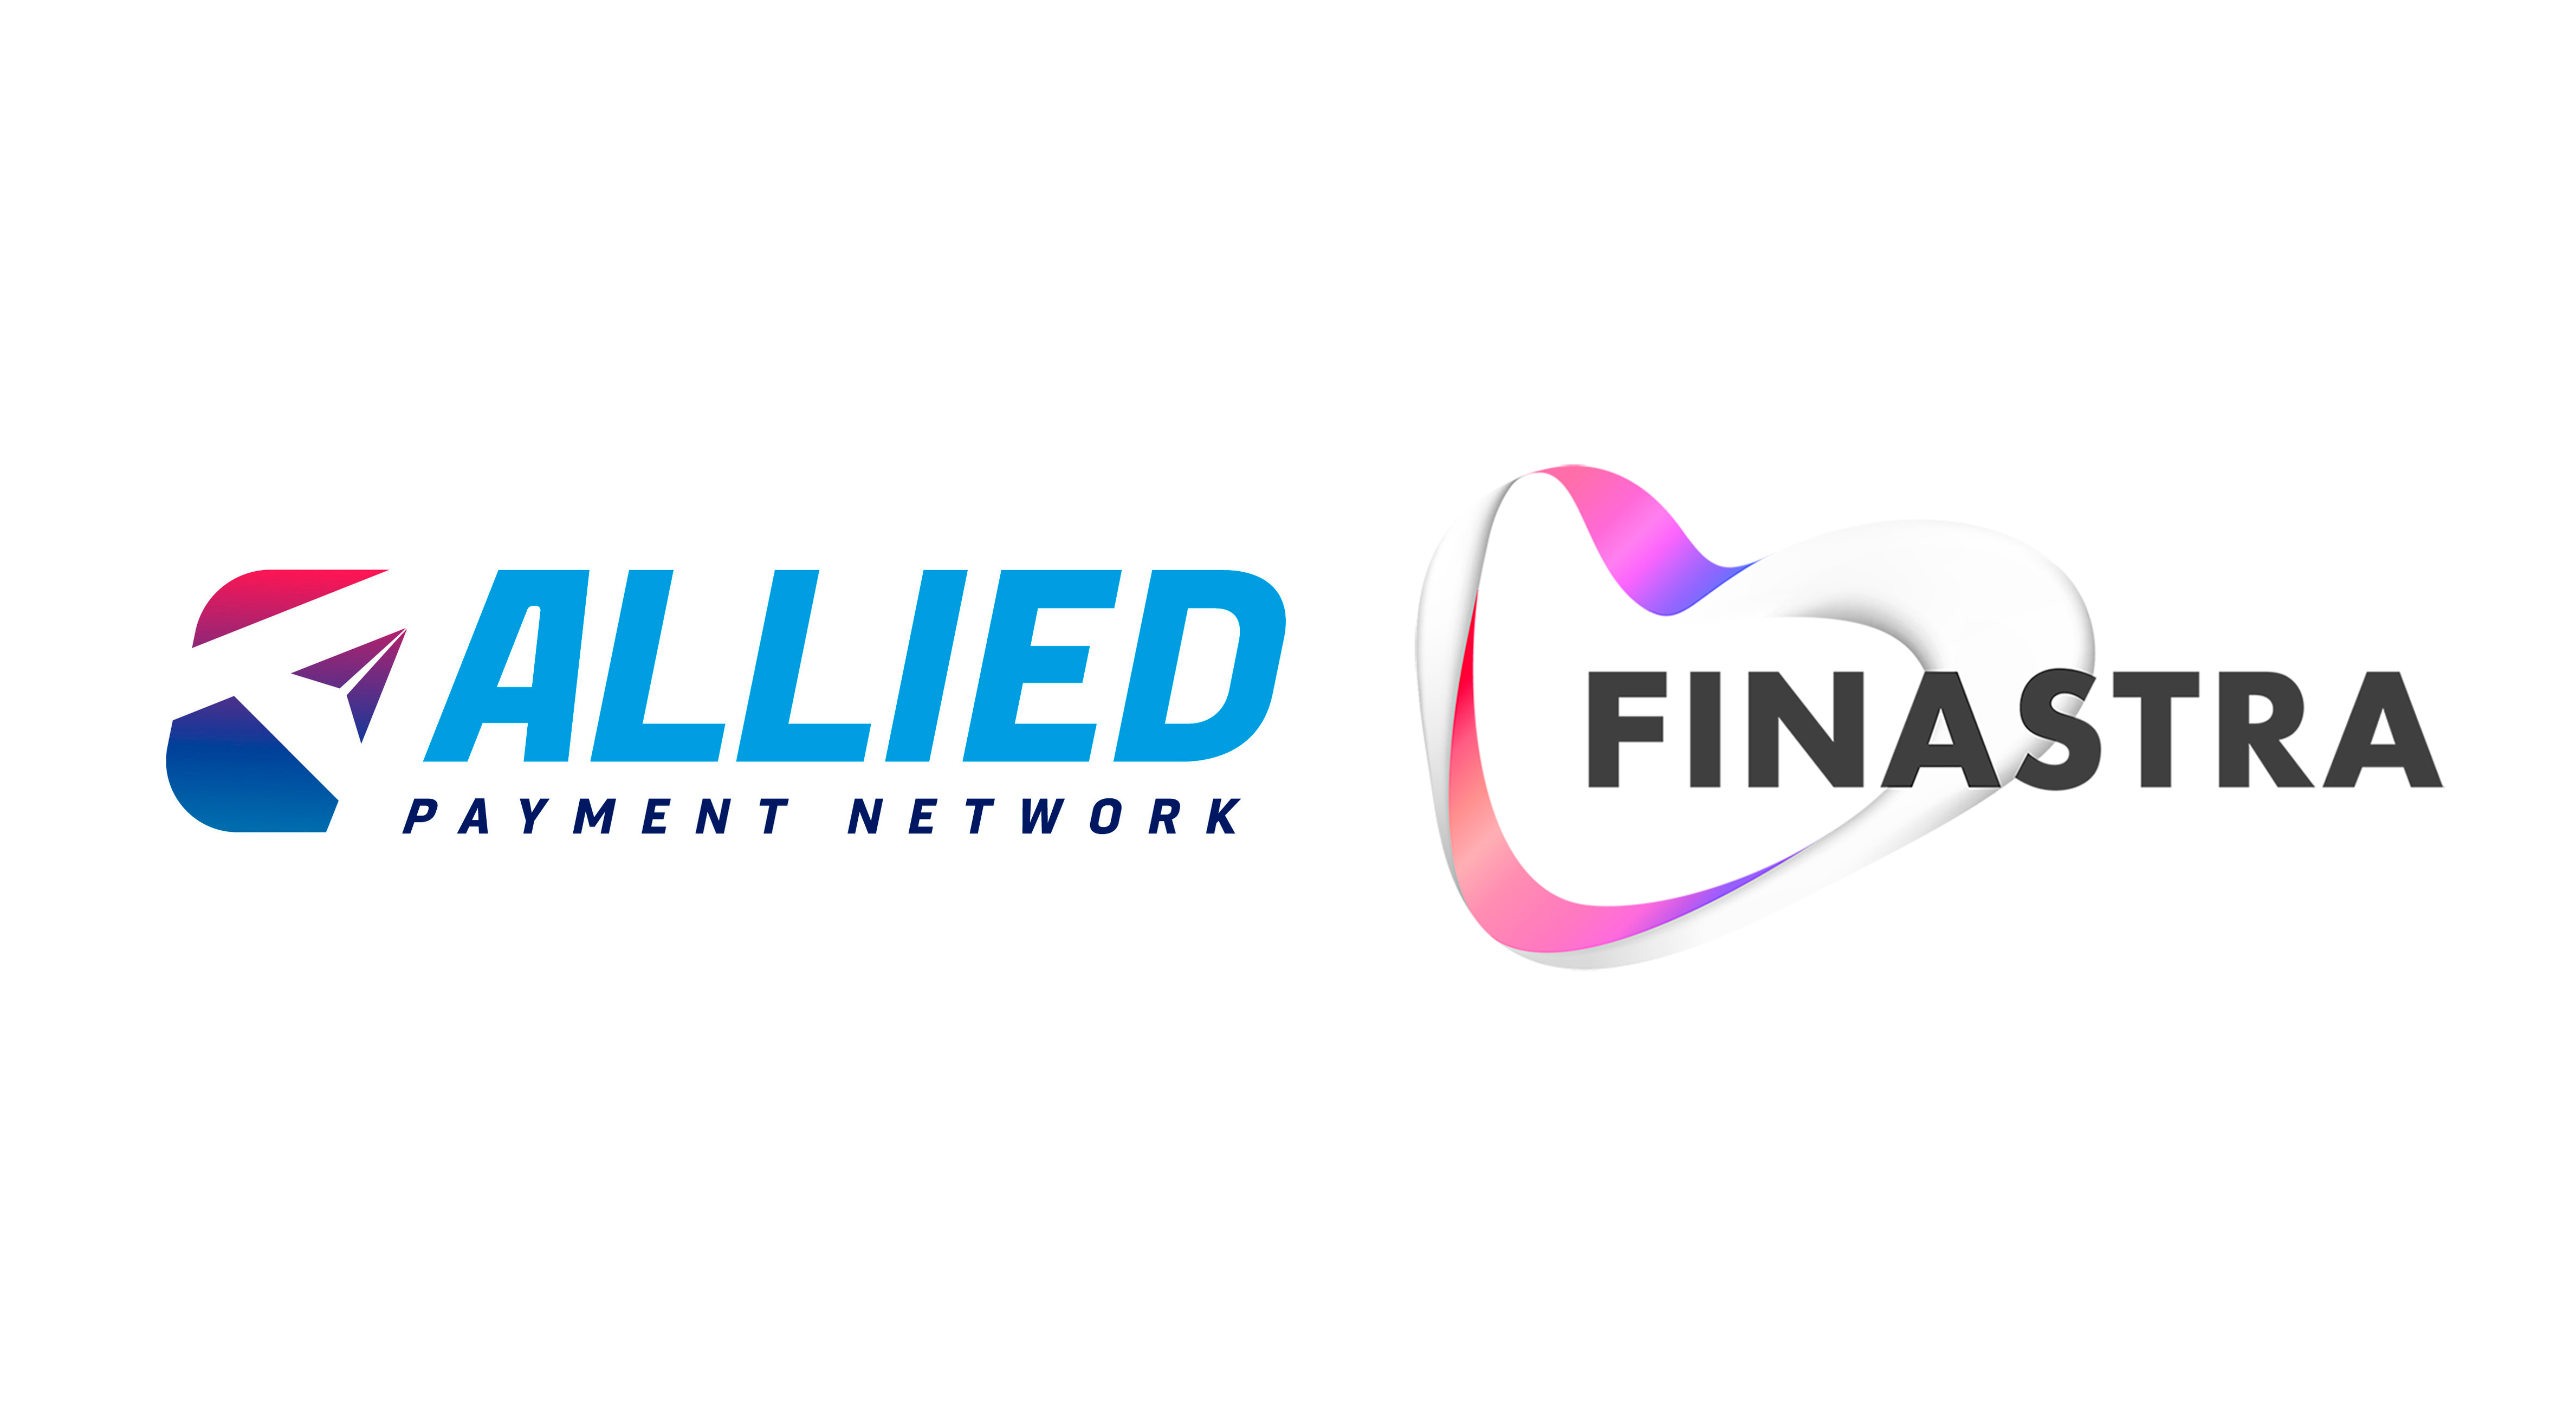 Allied Payment Network Brings Bitcoin Wallet to Banks and Credit Unions Through Finastra Platform